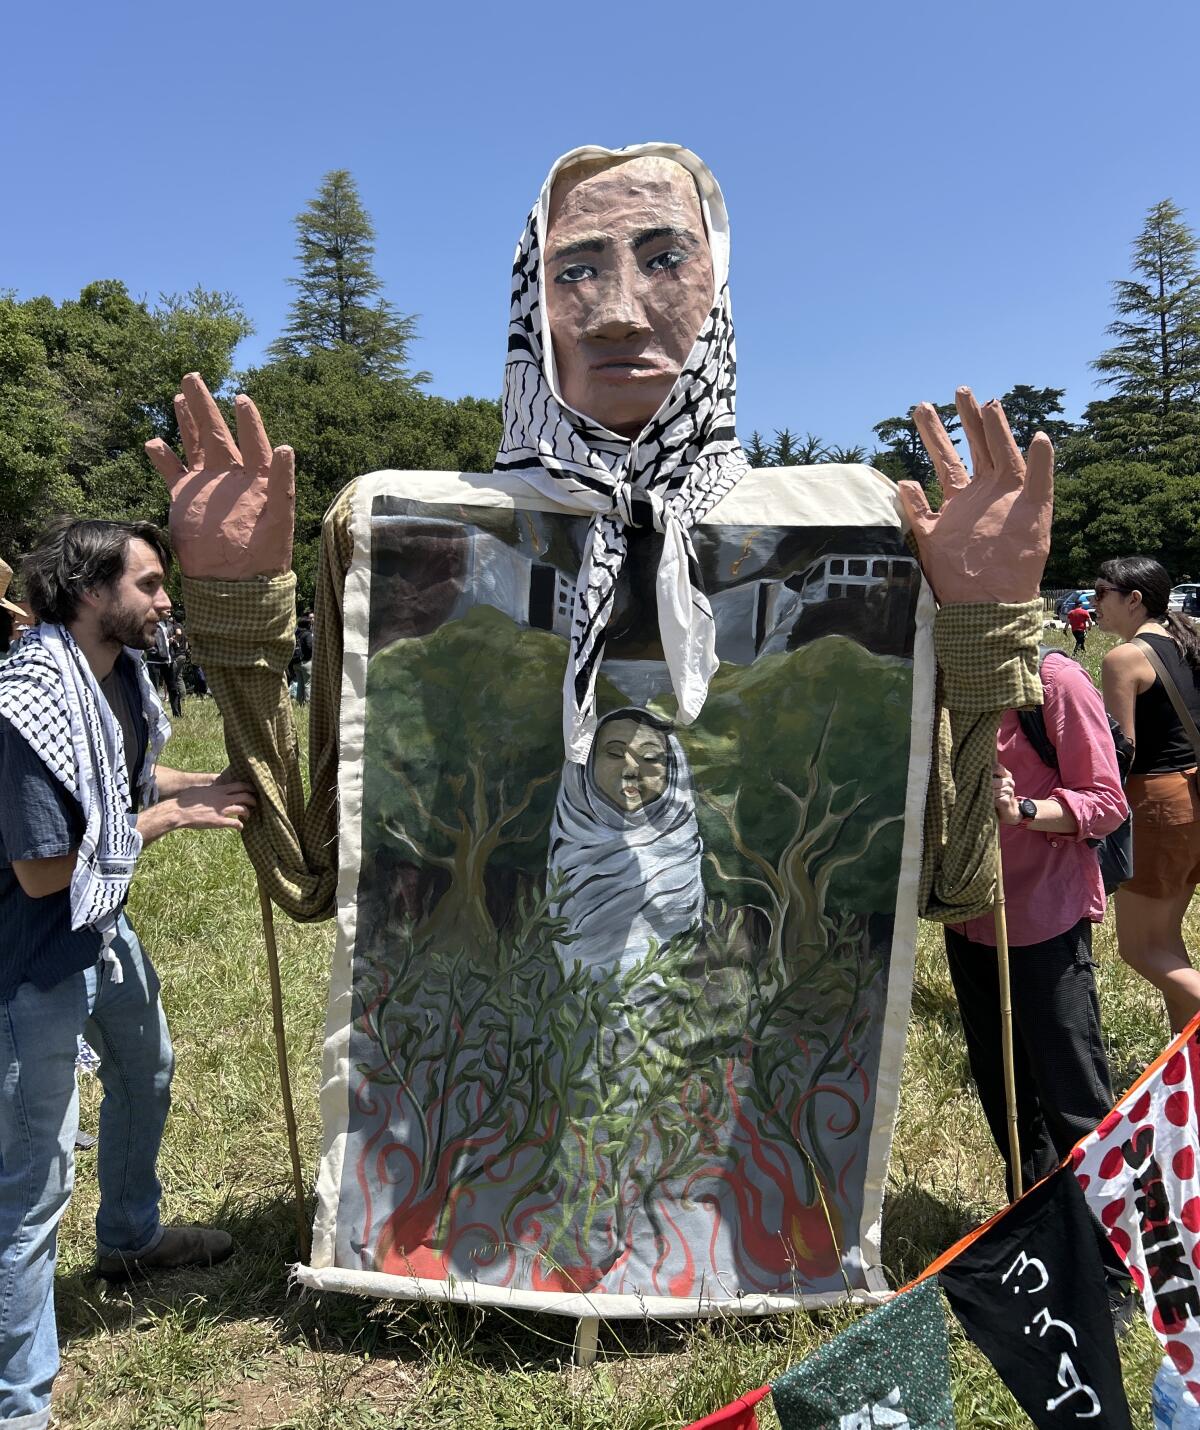 Protesters hold a puppet wearing a kaffiyeh.